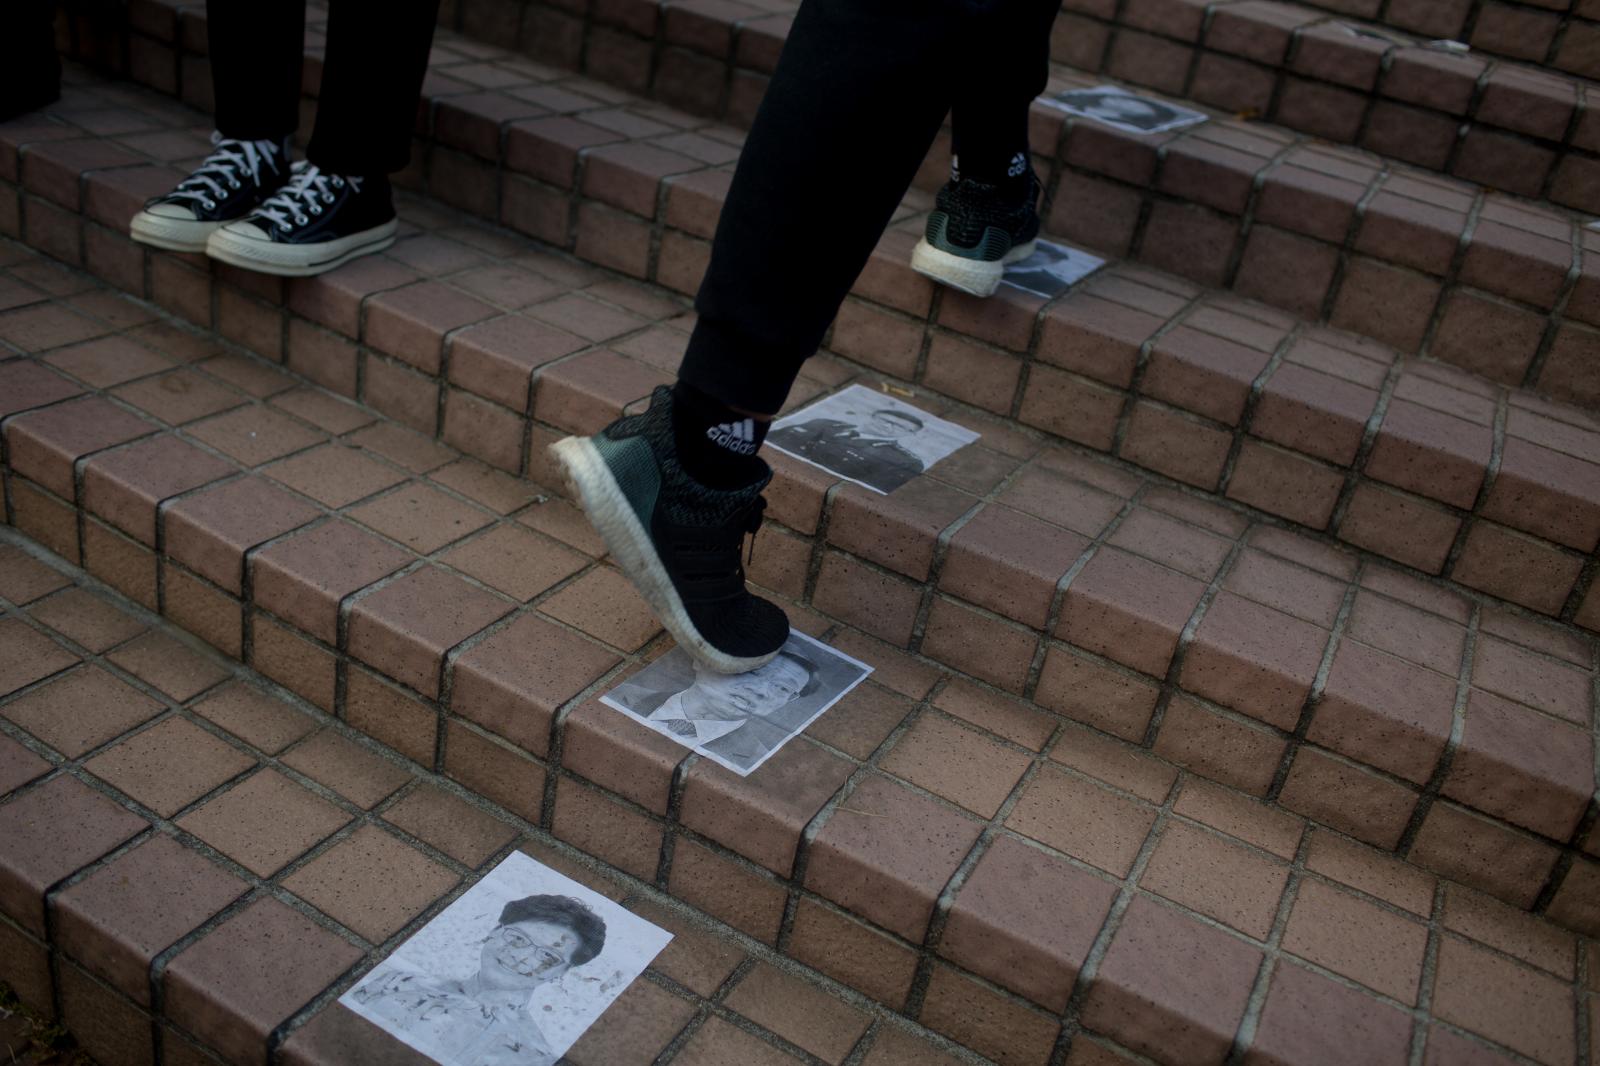 Protesters step on pictures of ... Hong Kong on January 12, 2020.